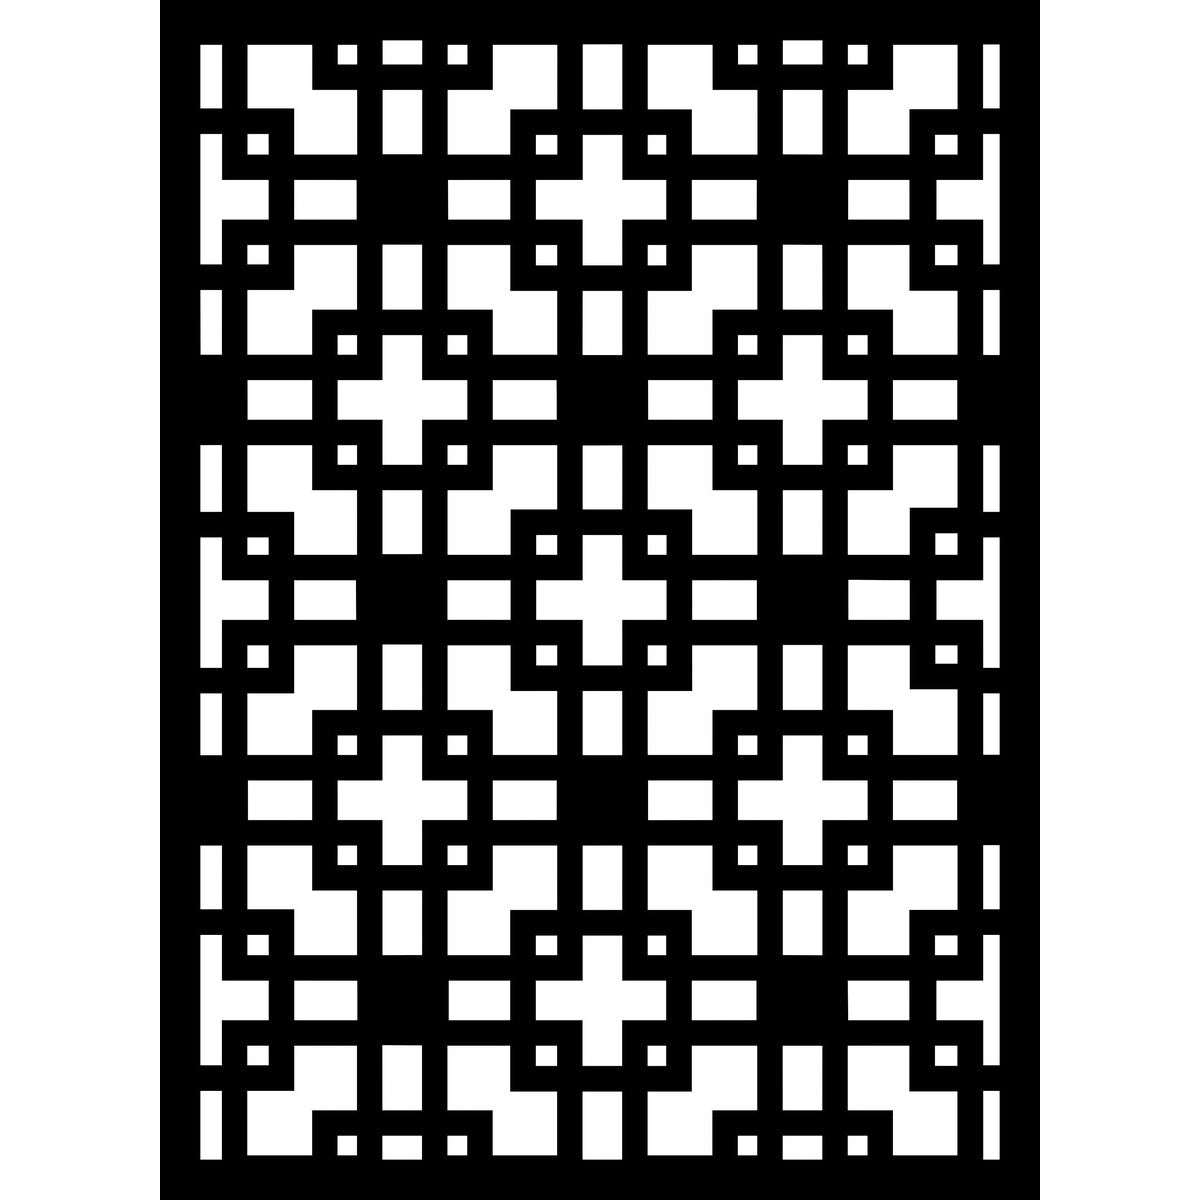 Decorative Screen & Fence Panel - The Squares